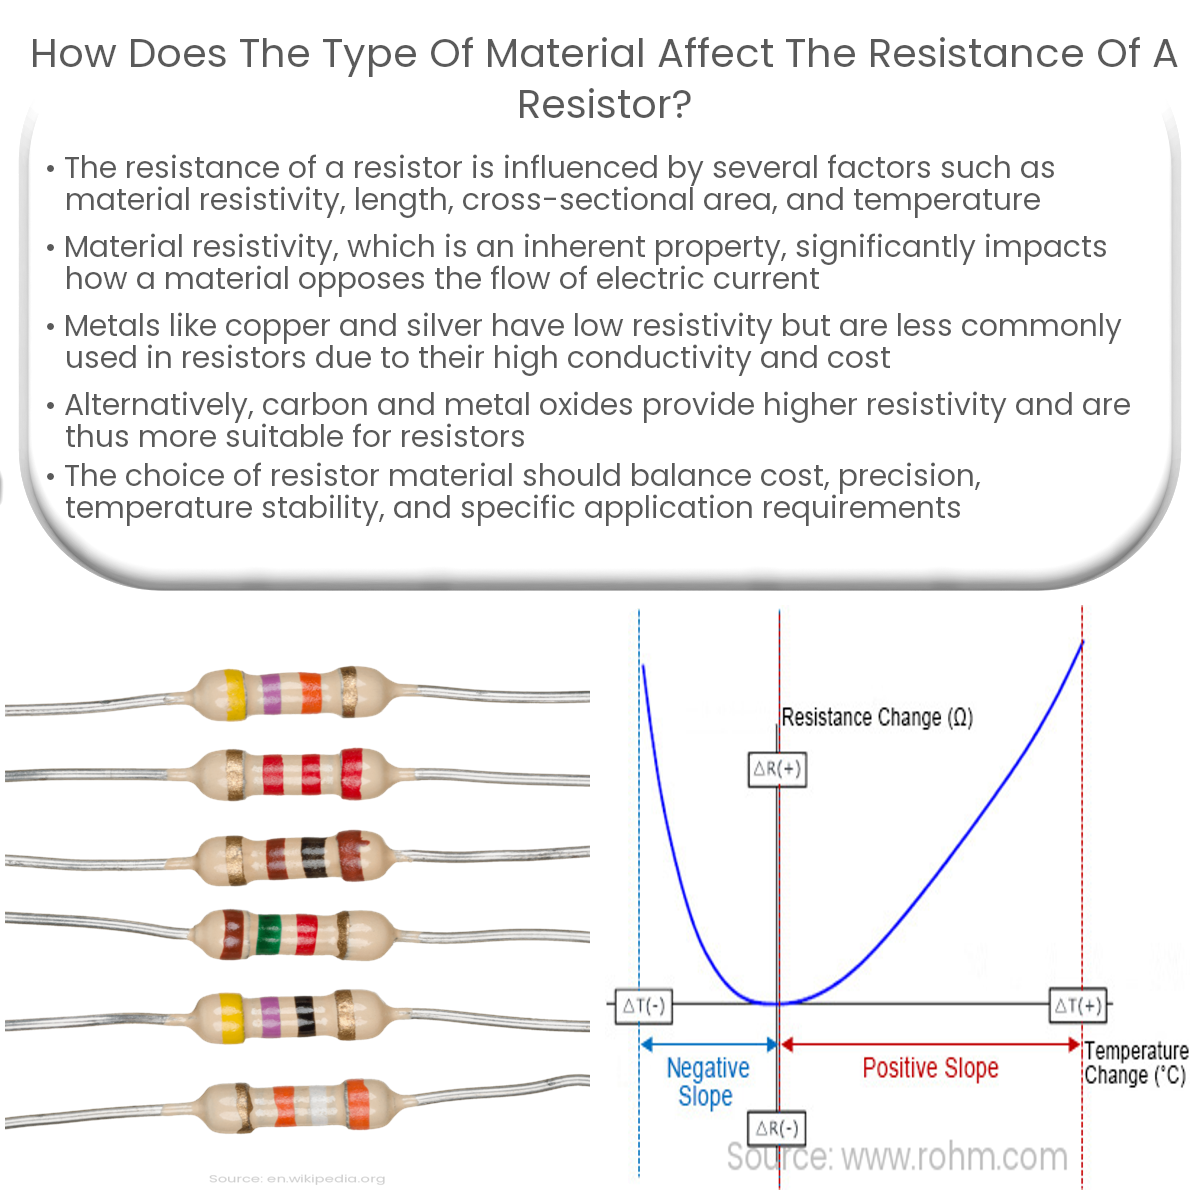 How does the type of material affect the resistance of a resistor?